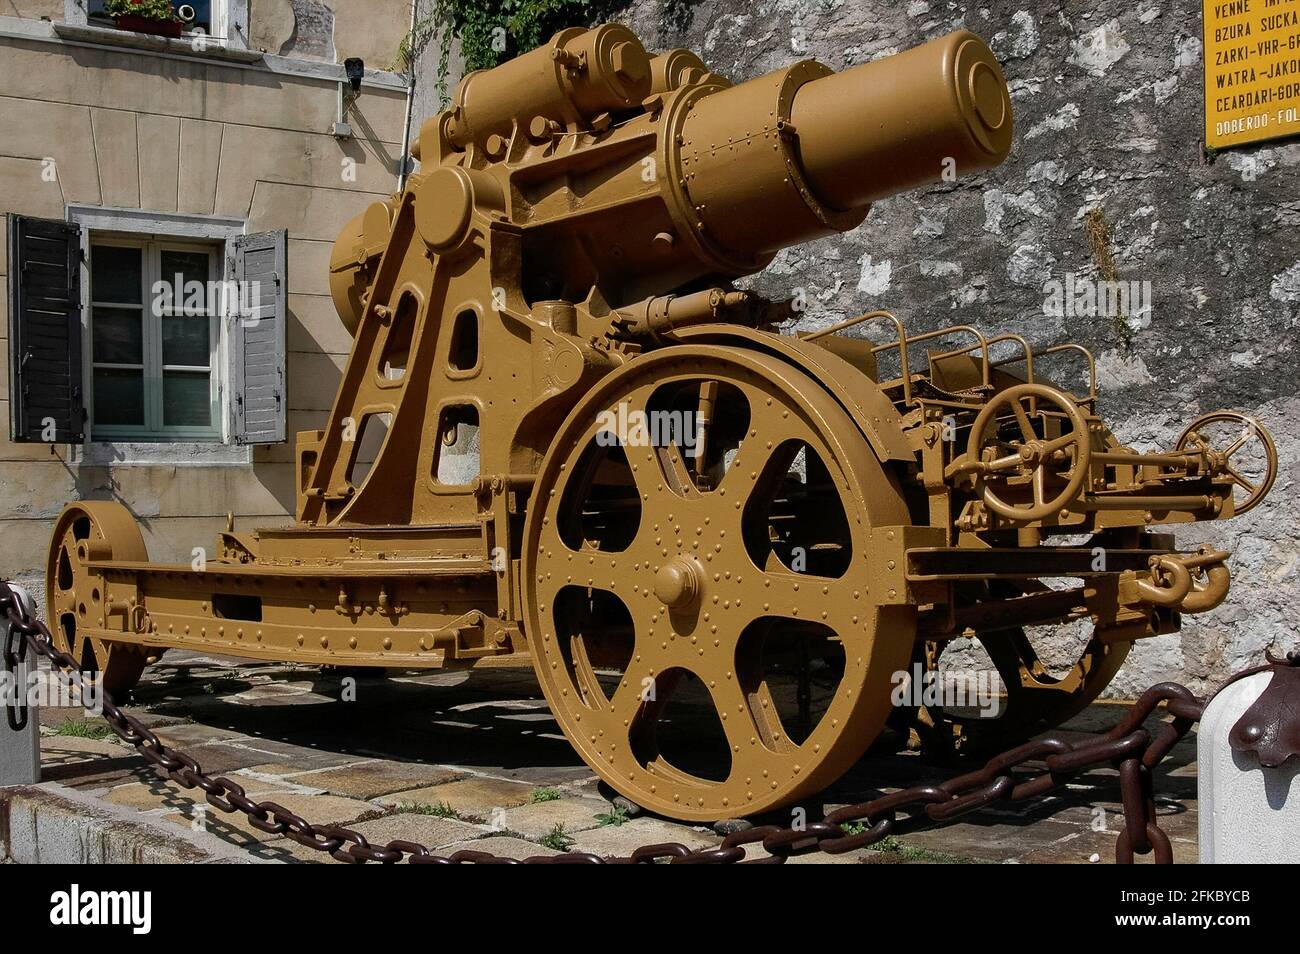 A rare surviving example of the concrete-piercing Škoda 30.5 cm Mörser M.11 heavy siege howitzers used by Austria-Hungary on its Italian and eastern fronts in World War I, and also by Nazi Germany in World War II, stands outside the Museo Storico Italiano della Guerra (Italian War History Museum) at Rovereto, Trentino-Alto Adige, Italy.  It fired 305 mm (12 ins) shells that could penetrate reinforced concrete up to 2 m thick, blow a crater 8 m (26 ft) wide and deep and kill enemy soldiers up to 400 m (1,312 ft) from the blast. Stock Photo